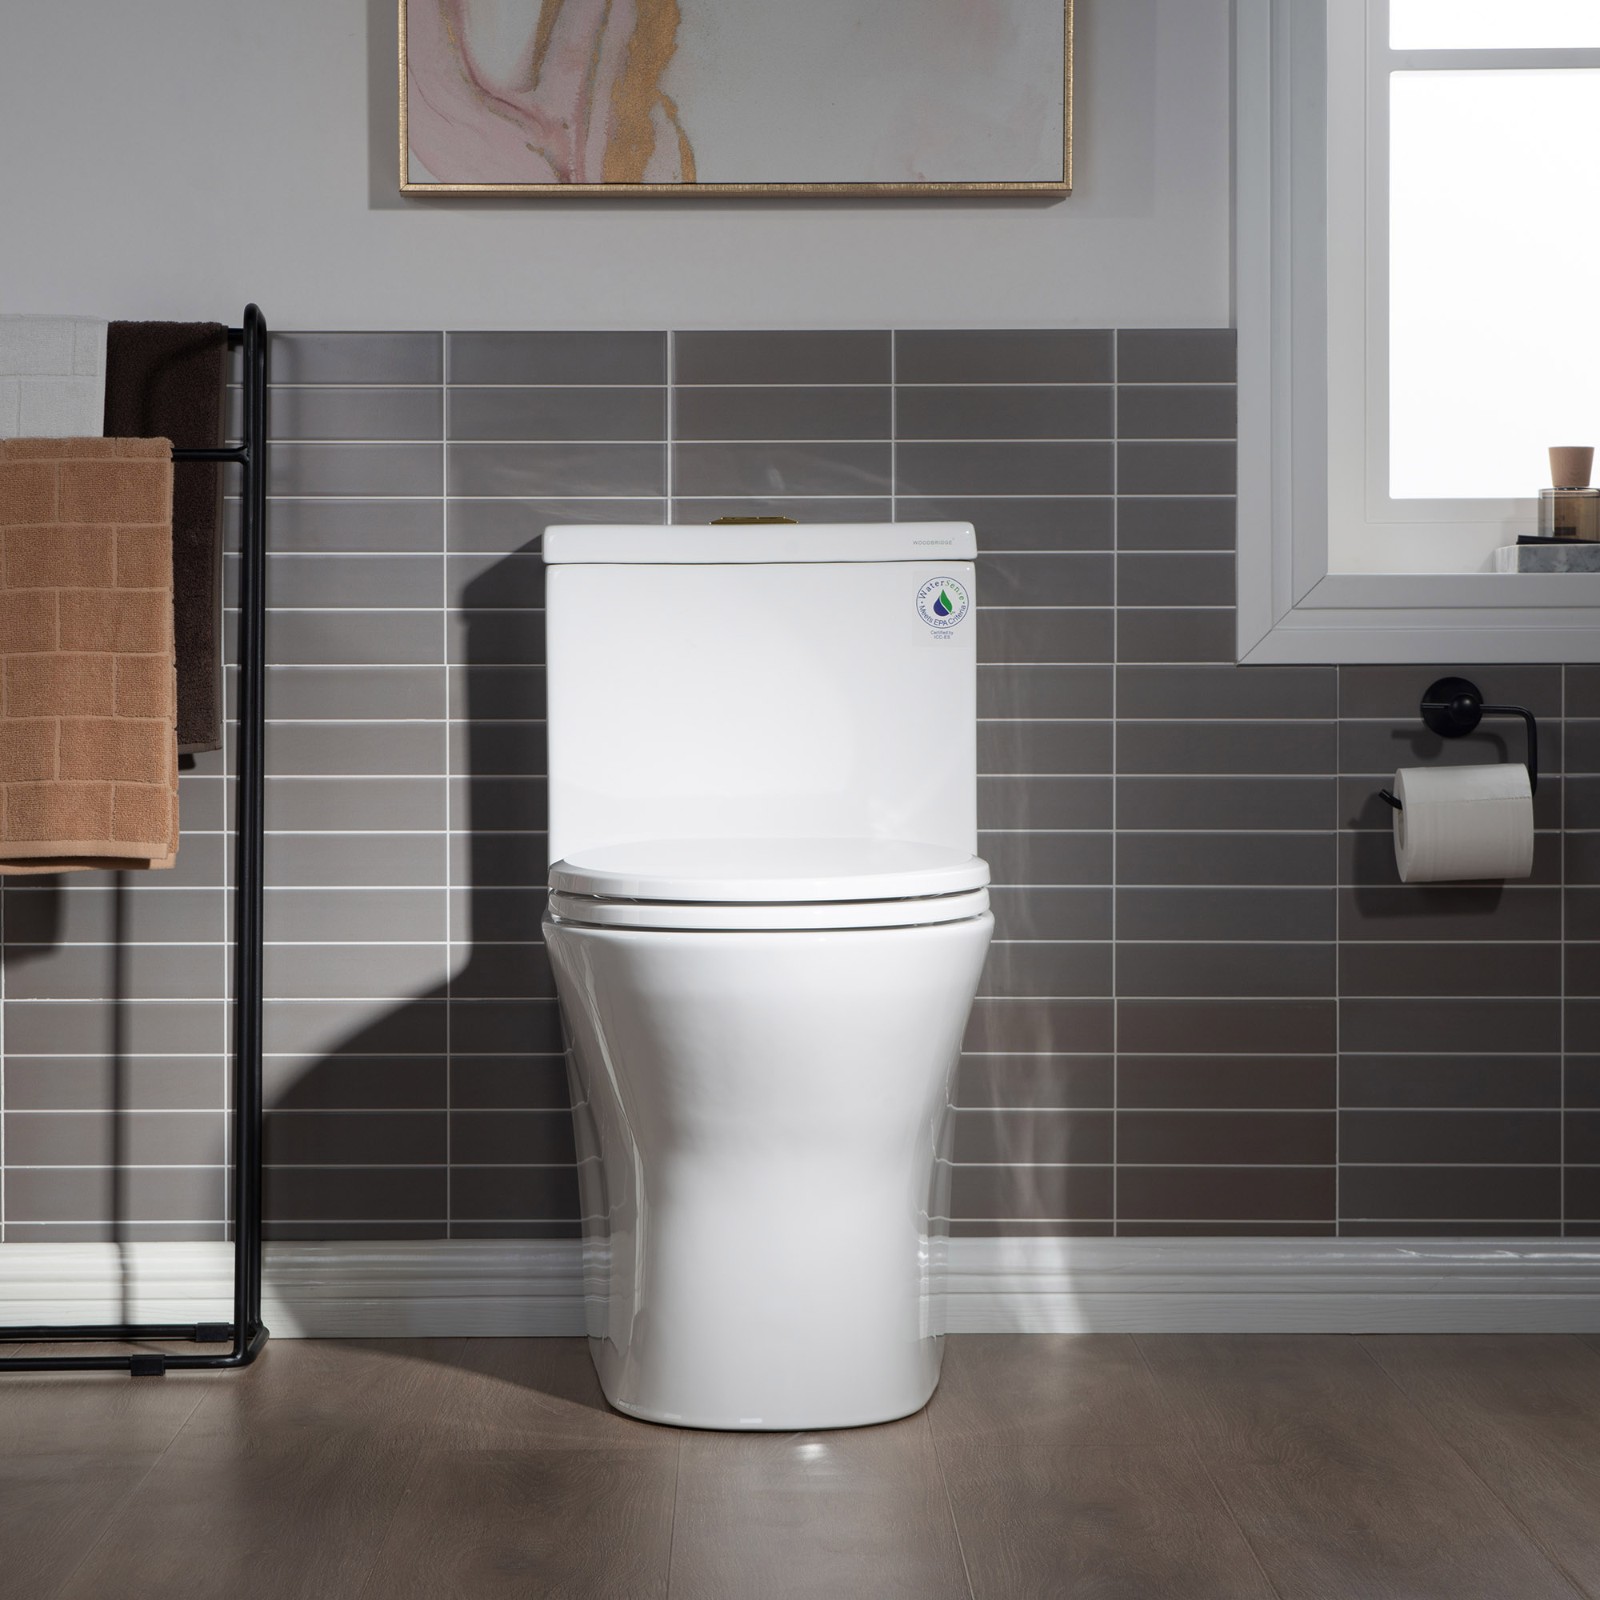  WOODBRIDGE One Piece Short Compact Bathroom Tiny Mini Commode Water Closet Dual Flush Concealed Trapway, Brushed Gold Button B0500-BG, White_5660